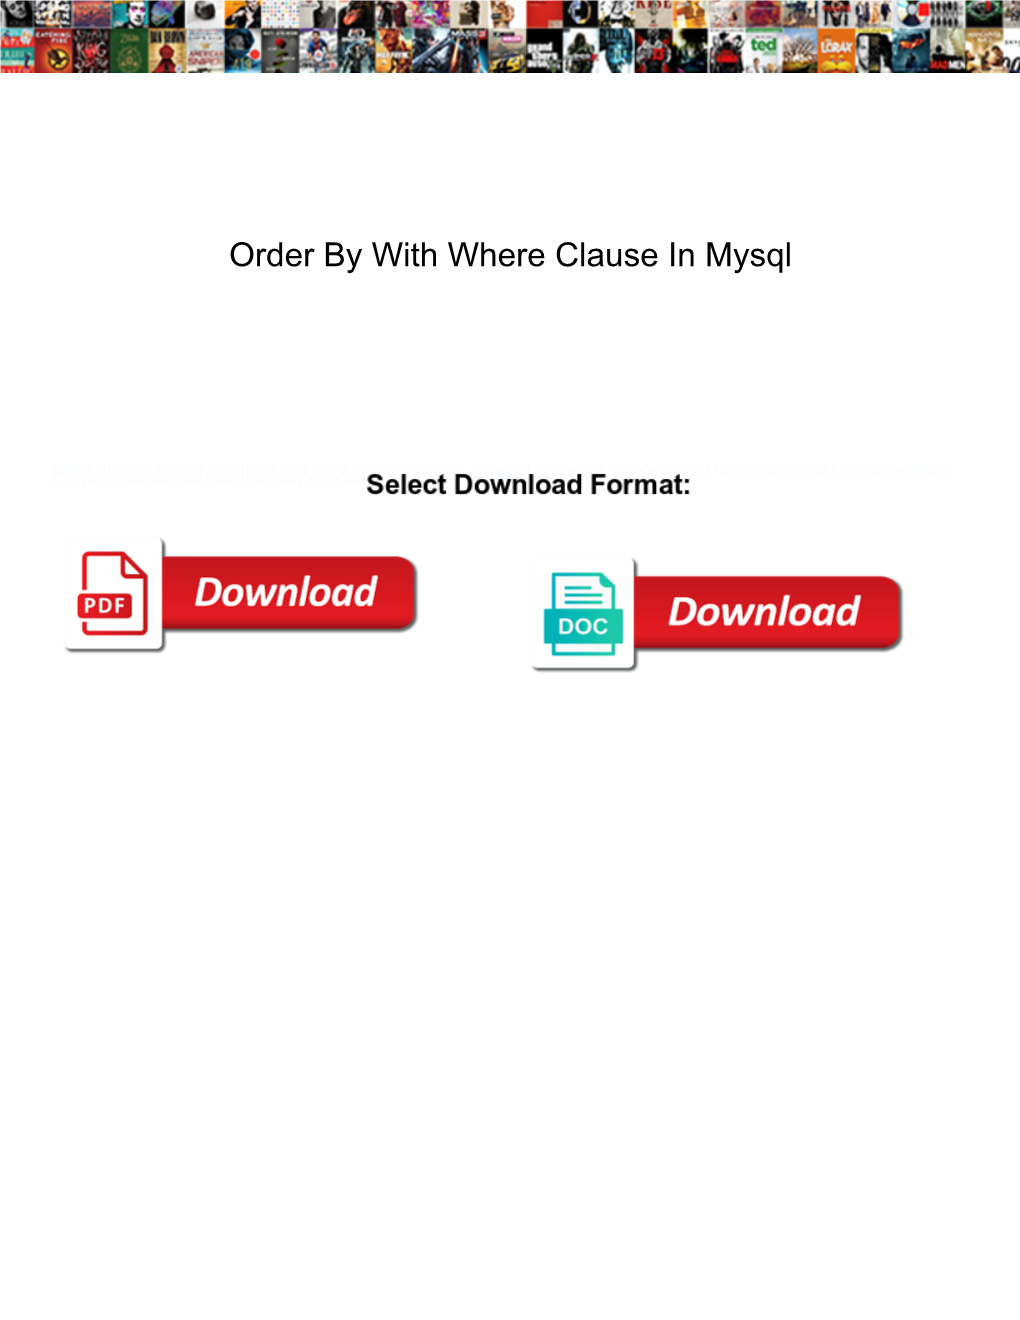 Order by with Where Clause in Mysql